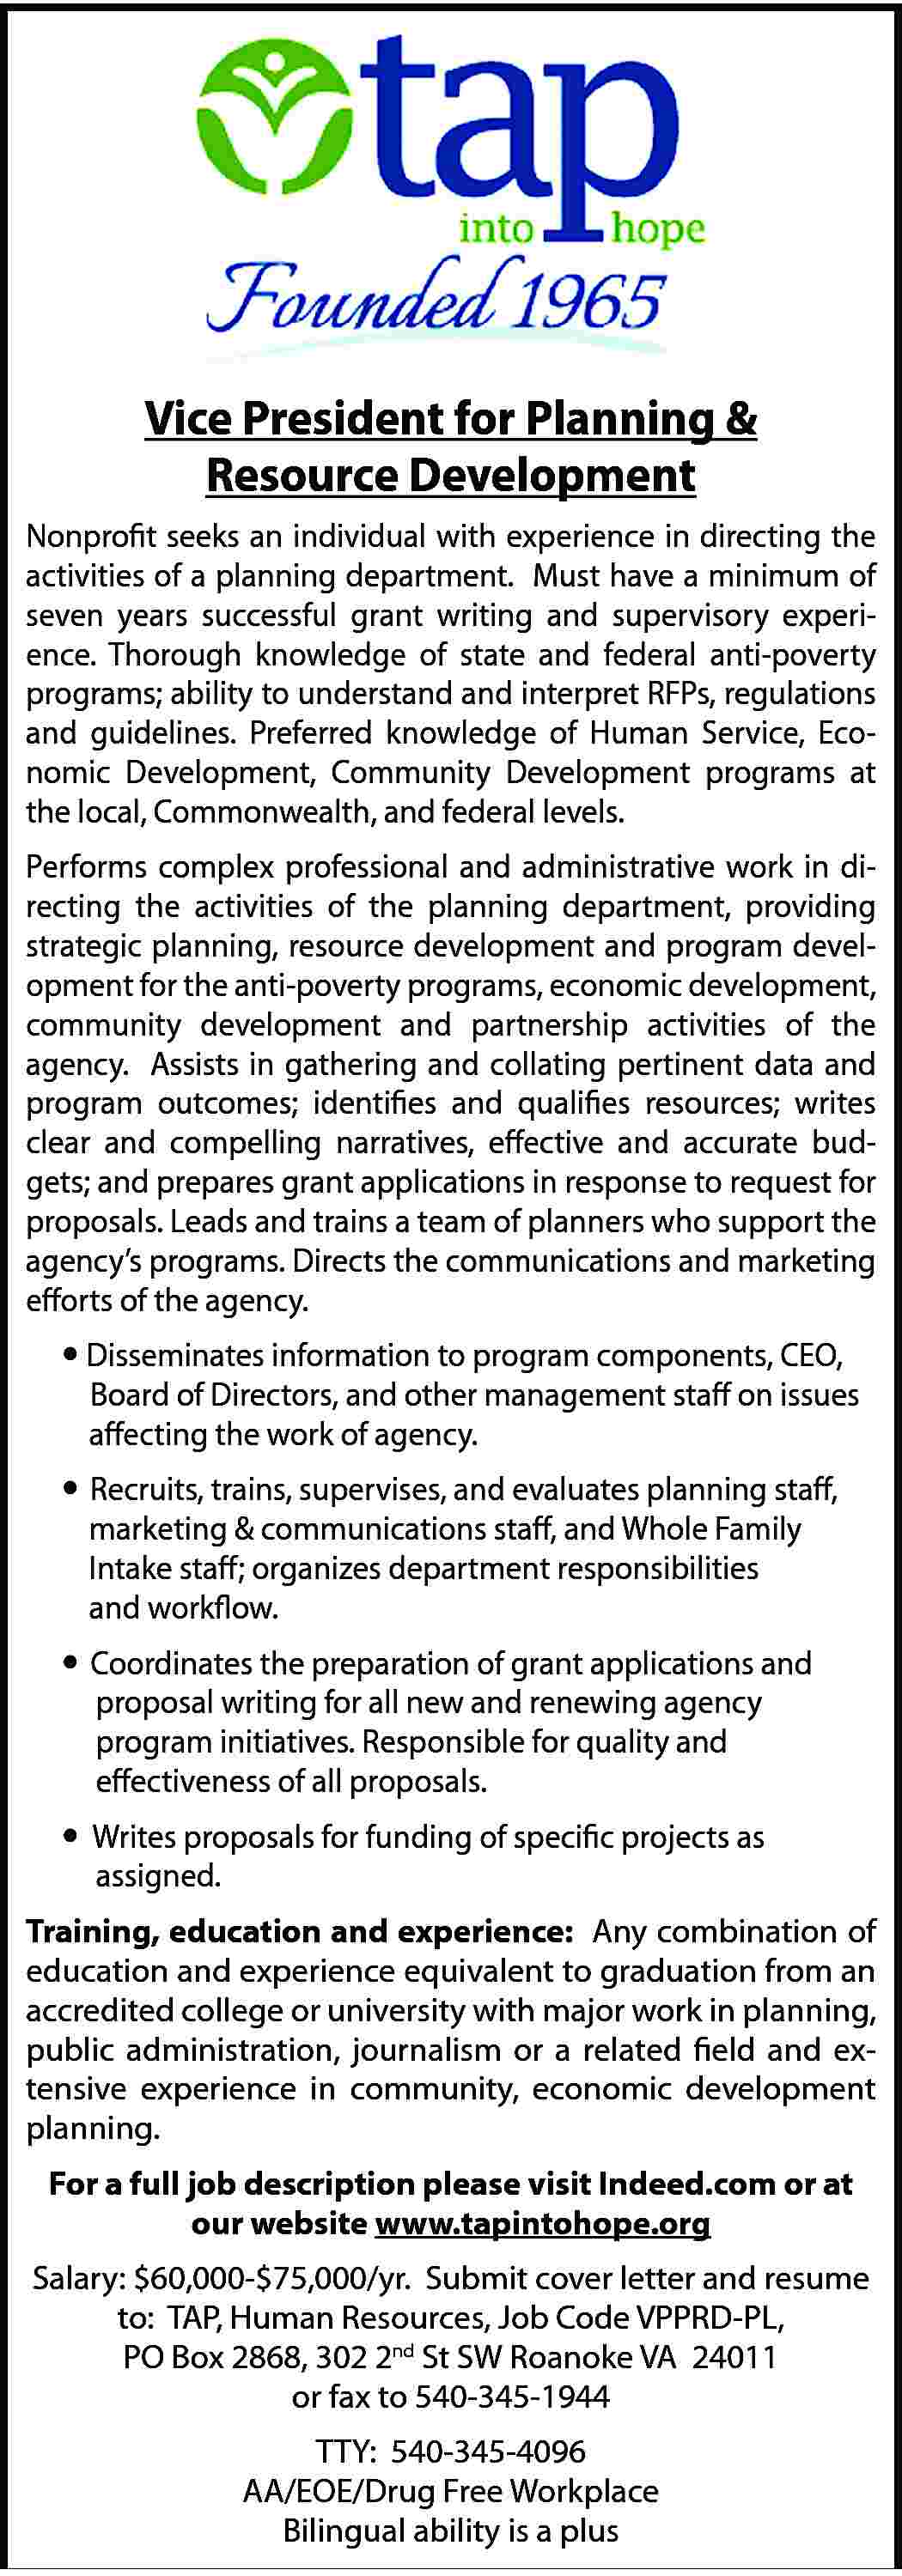 Vice President for Planning &  Vice President for Planning & Resource Development Nonprofit seeks an individual with experience in directing the activities of a planning department. Must have a minimum of seven years successful grant writing and supervisory experience. Thorough knowledge of state and federal anti-poverty programs; ability to understand and interpret RFPs, regulations and guidelines. Preferred knowledge of Human Service, Economic Development, Community Development programs at the local, Commonwealth, and federal levels. Performs complex professional and administrative work in directing the activities of the planning department, providing strategic planning, resource development and program development for the anti-poverty programs, economic development, community development and partnership activities of the agency. Assists in gathering and collating pertinent data and program outcomes; identifies and qualifies resources; writes clear and compelling narratives, effective and accurate budgets; and prepares grant applications in response to request for proposals. Leads and trains a team of planners who support the agency’s programs. Directs the communications and marketing efforts of the agency.  Disseminates information to program components, CEO, 	 Board of Directors, and other management staff on issues affecting the work of agency. 	 Recruits, trains, supervises, and evaluates planning staff, marketing & communications staff, and Whole Family Intake staff; organizes department responsibilities and workflow. 	 Coordinates the preparation of grant applications and proposal writing for all new and renewing agency program initiatives. Responsible for quality and effectiveness of all proposals.  Writes proposals for funding of specific projects as assigned. Training, education and experience: Any combination of education and experience equivalent to graduation from an accredited college or university with major work in planning, public administration, journalism or a related field and extensive experience in community, economic development planning. For a full job description please visit Indeed.com or at our website www.tapintohope.org Salary: $60,000-$75,000/yr. Submit cover letter and resume to: TAP, Human Resources, Job Code VPPRD-PL, PO Box 2868, 302 2nd St SW Roanoke VA 24011 or fax to 540-345-1944 TTY: 540-345-4096 AA/EOE/Drug Free Workplace Bilingual ability is a plus